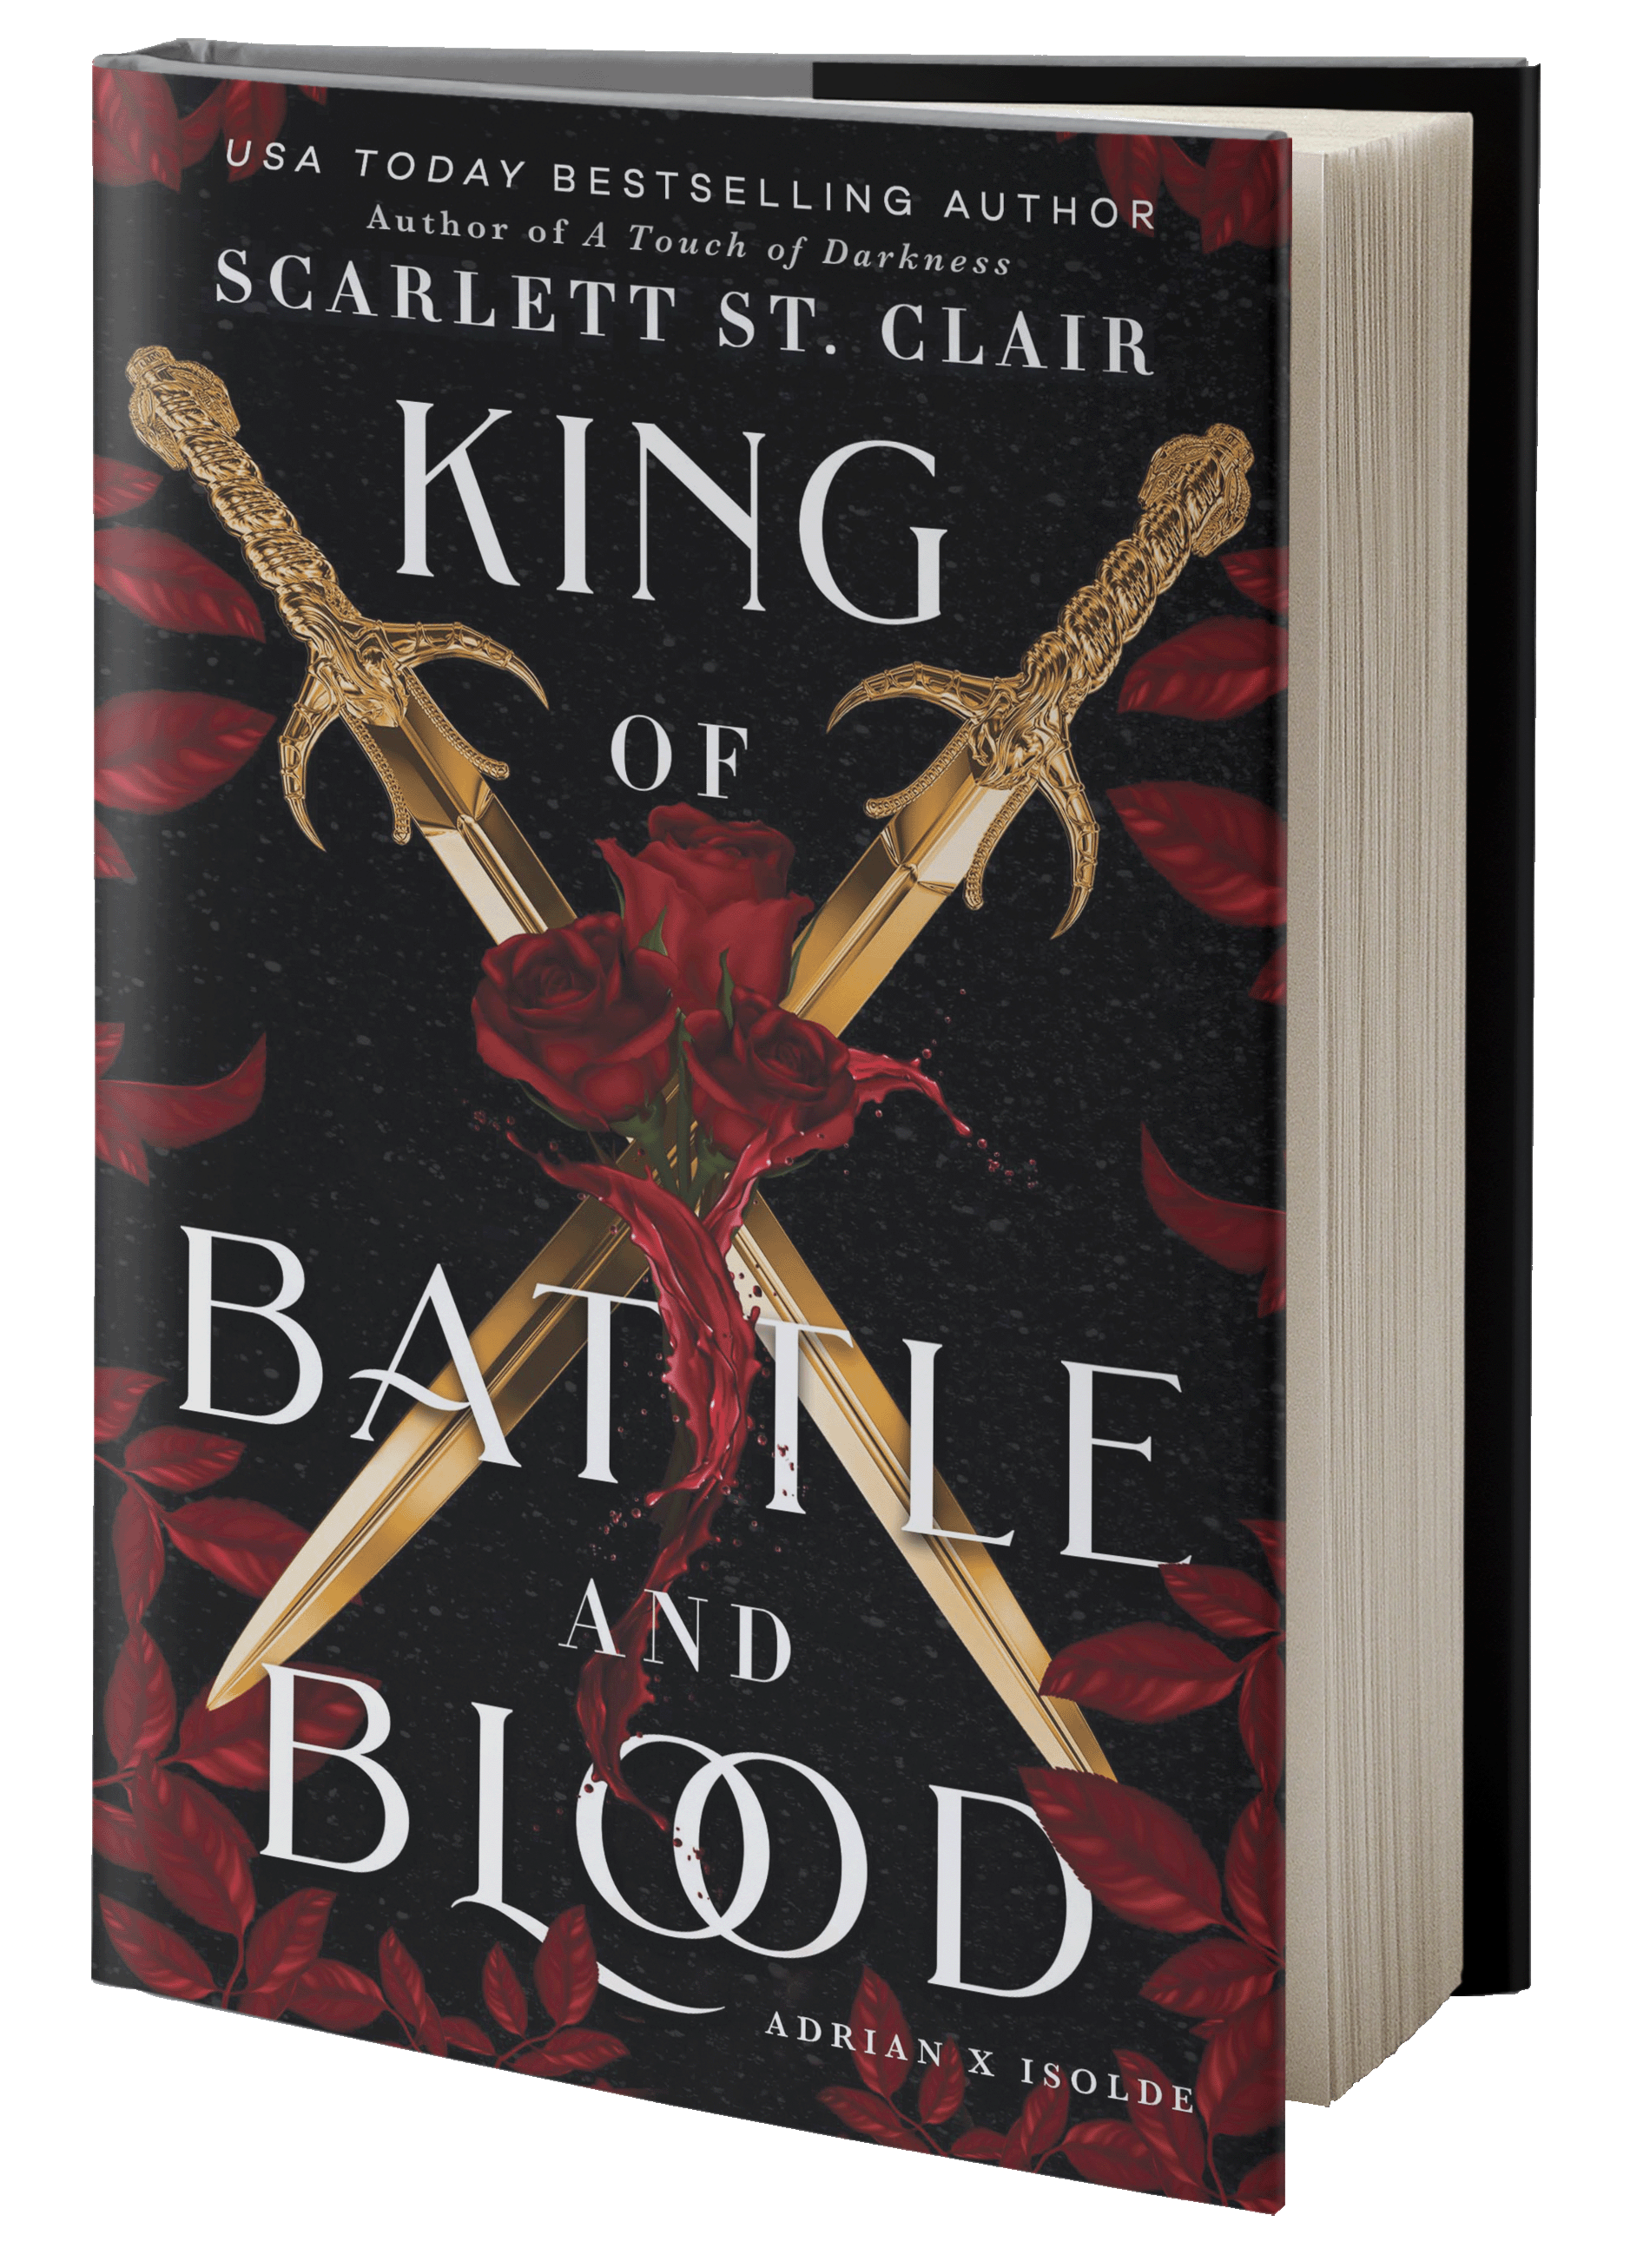 Book cover of "King of Battle and Blood"